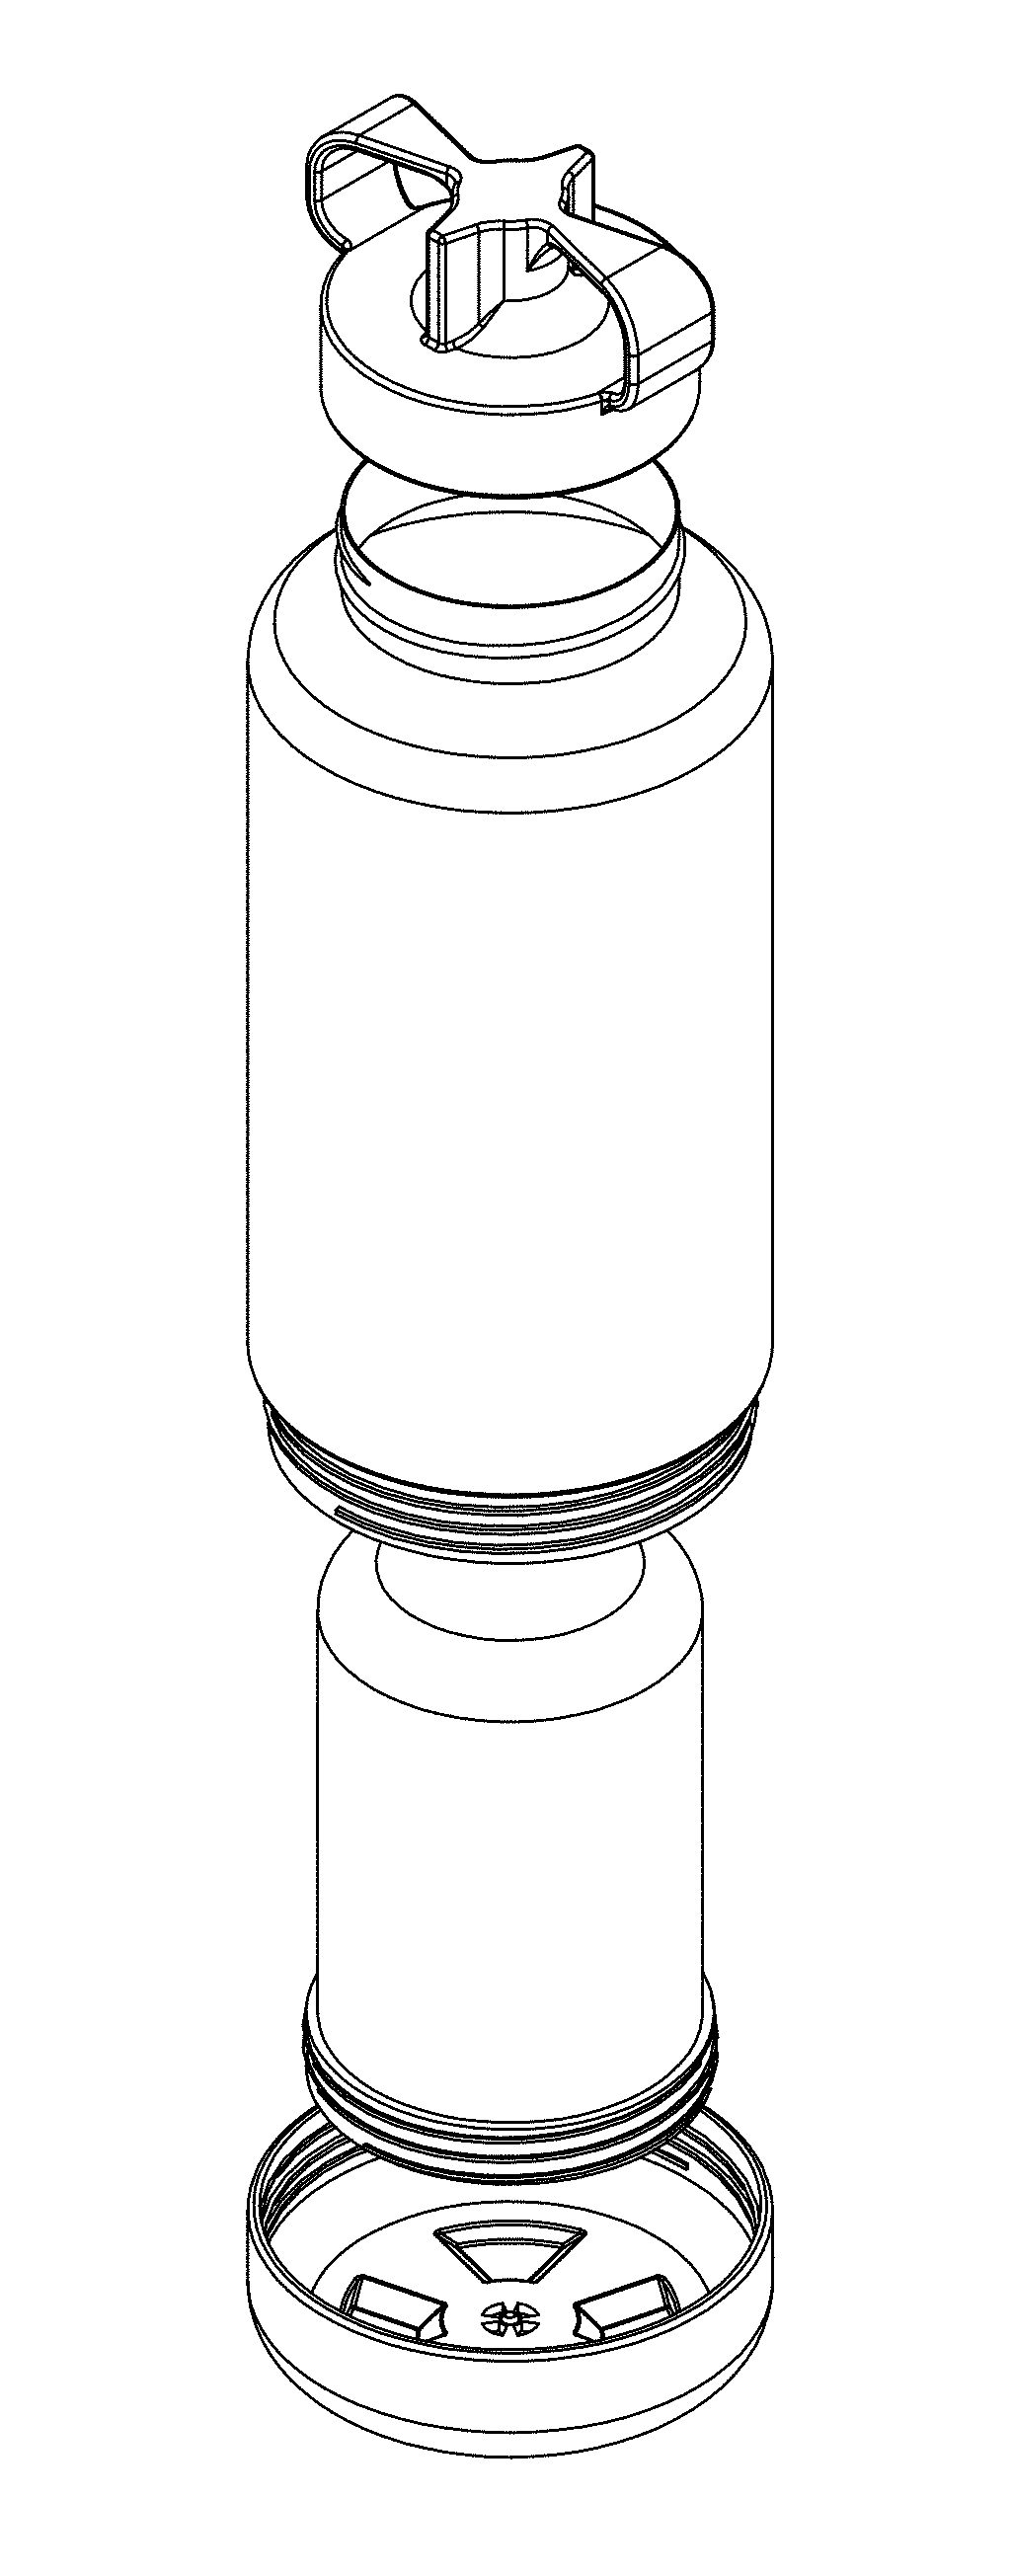 Hydration container with self-adjusting drink and storage compartments